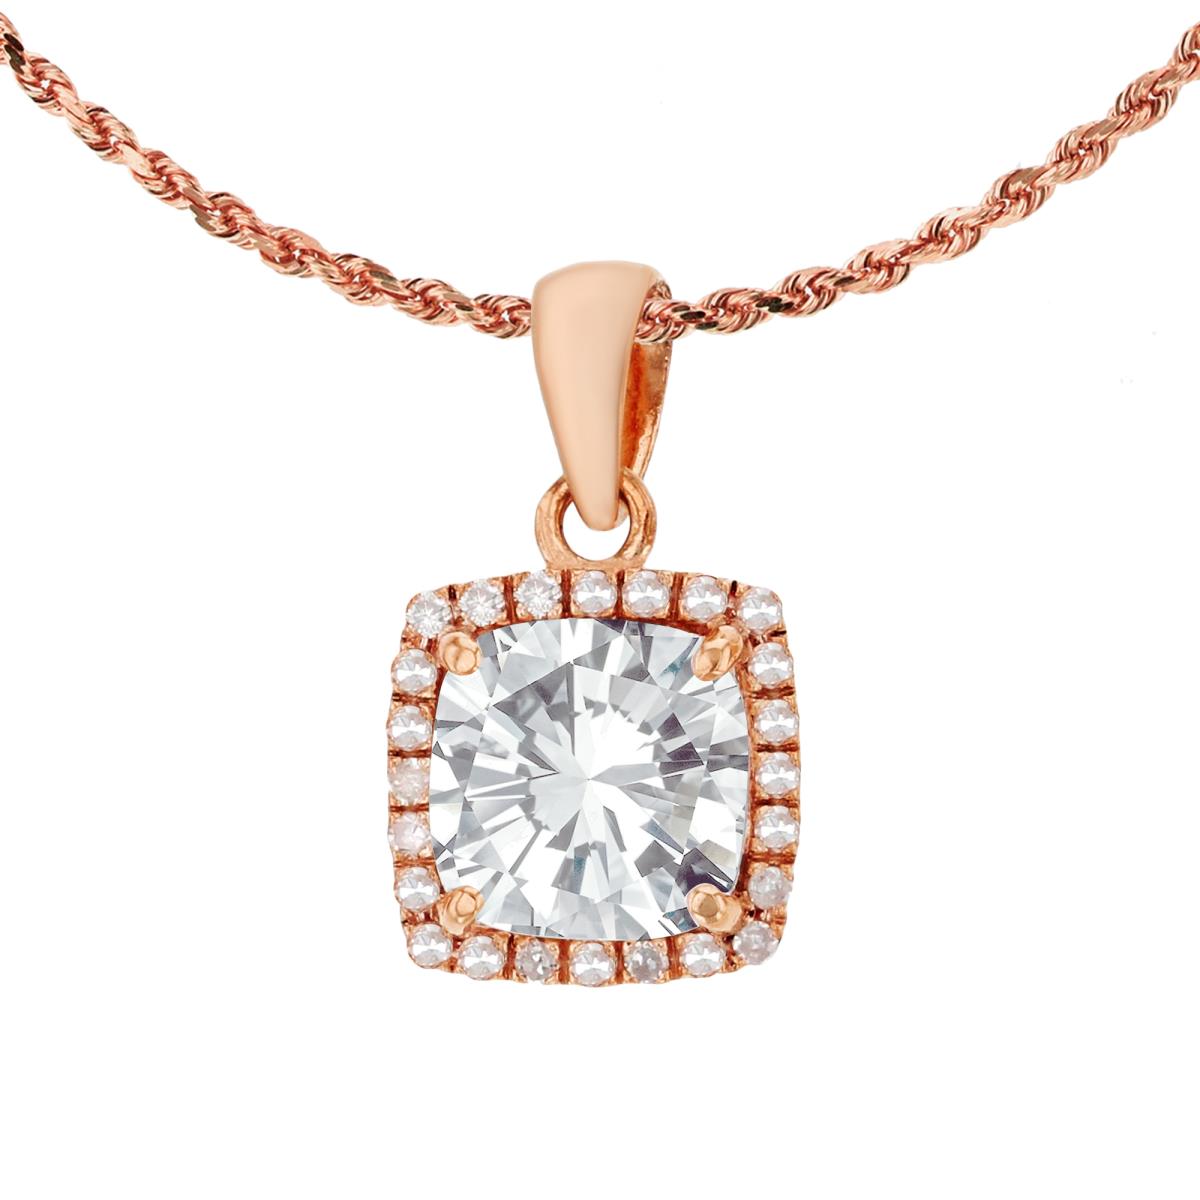 10K Rose Gold 7mm Cushion White Topaz & 0.12 CTTW Diamond Halo 18" Rope Chain Necklace